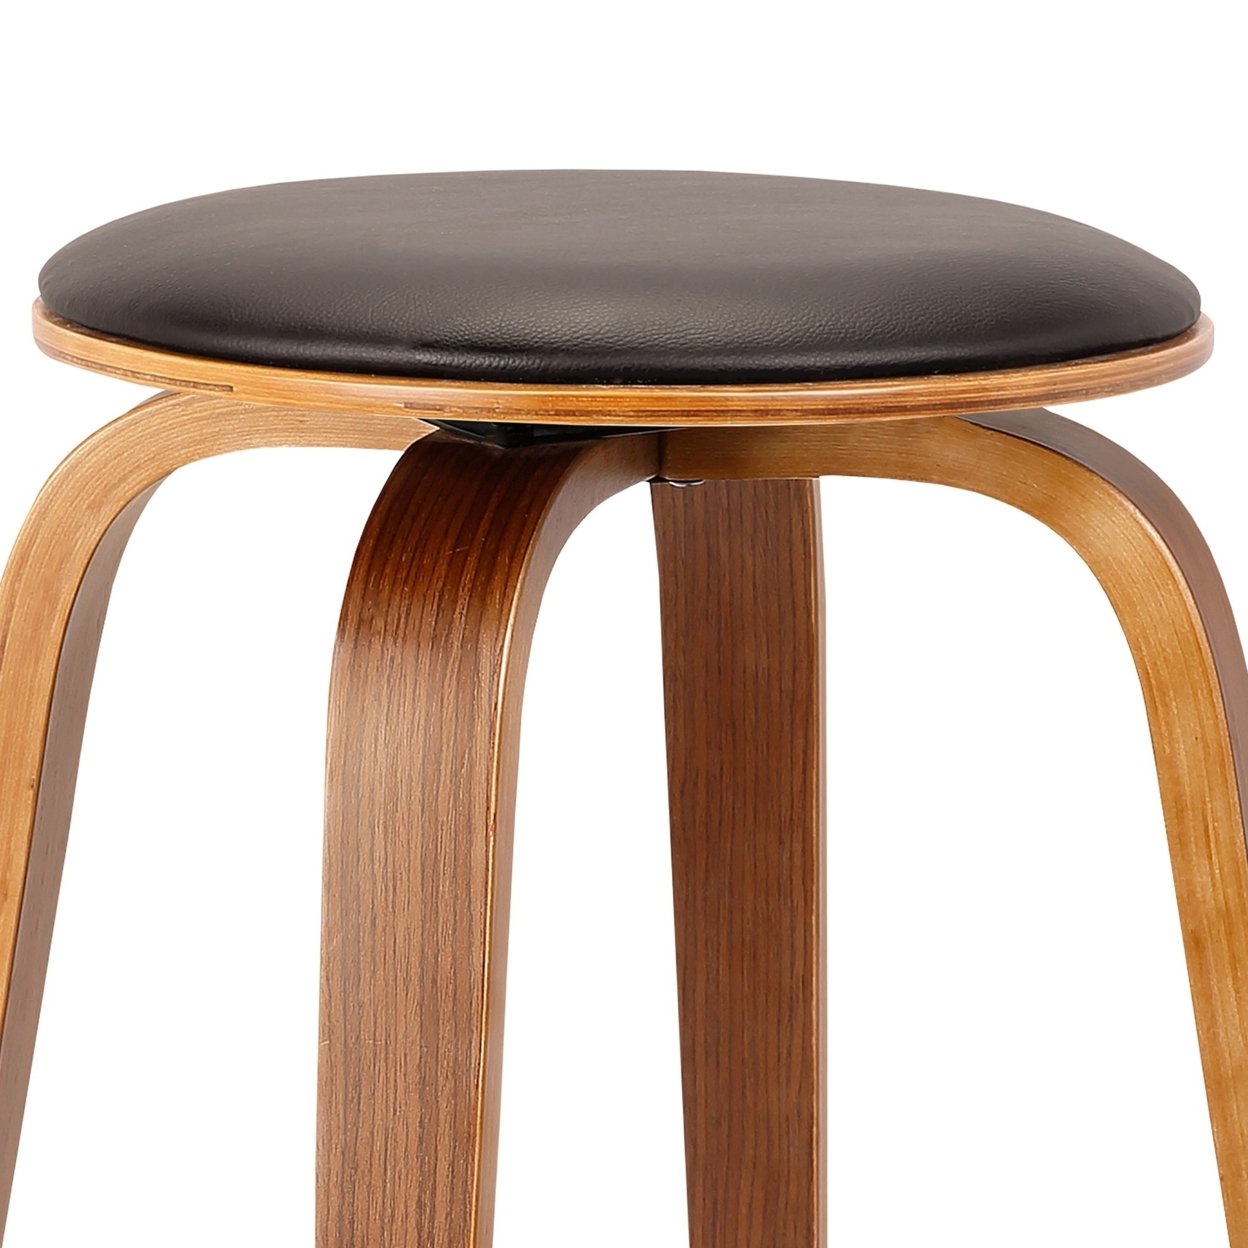 Round Leatherette Wooden Counter Stool With Flared Legs, Brown- Saltoro Sherpi